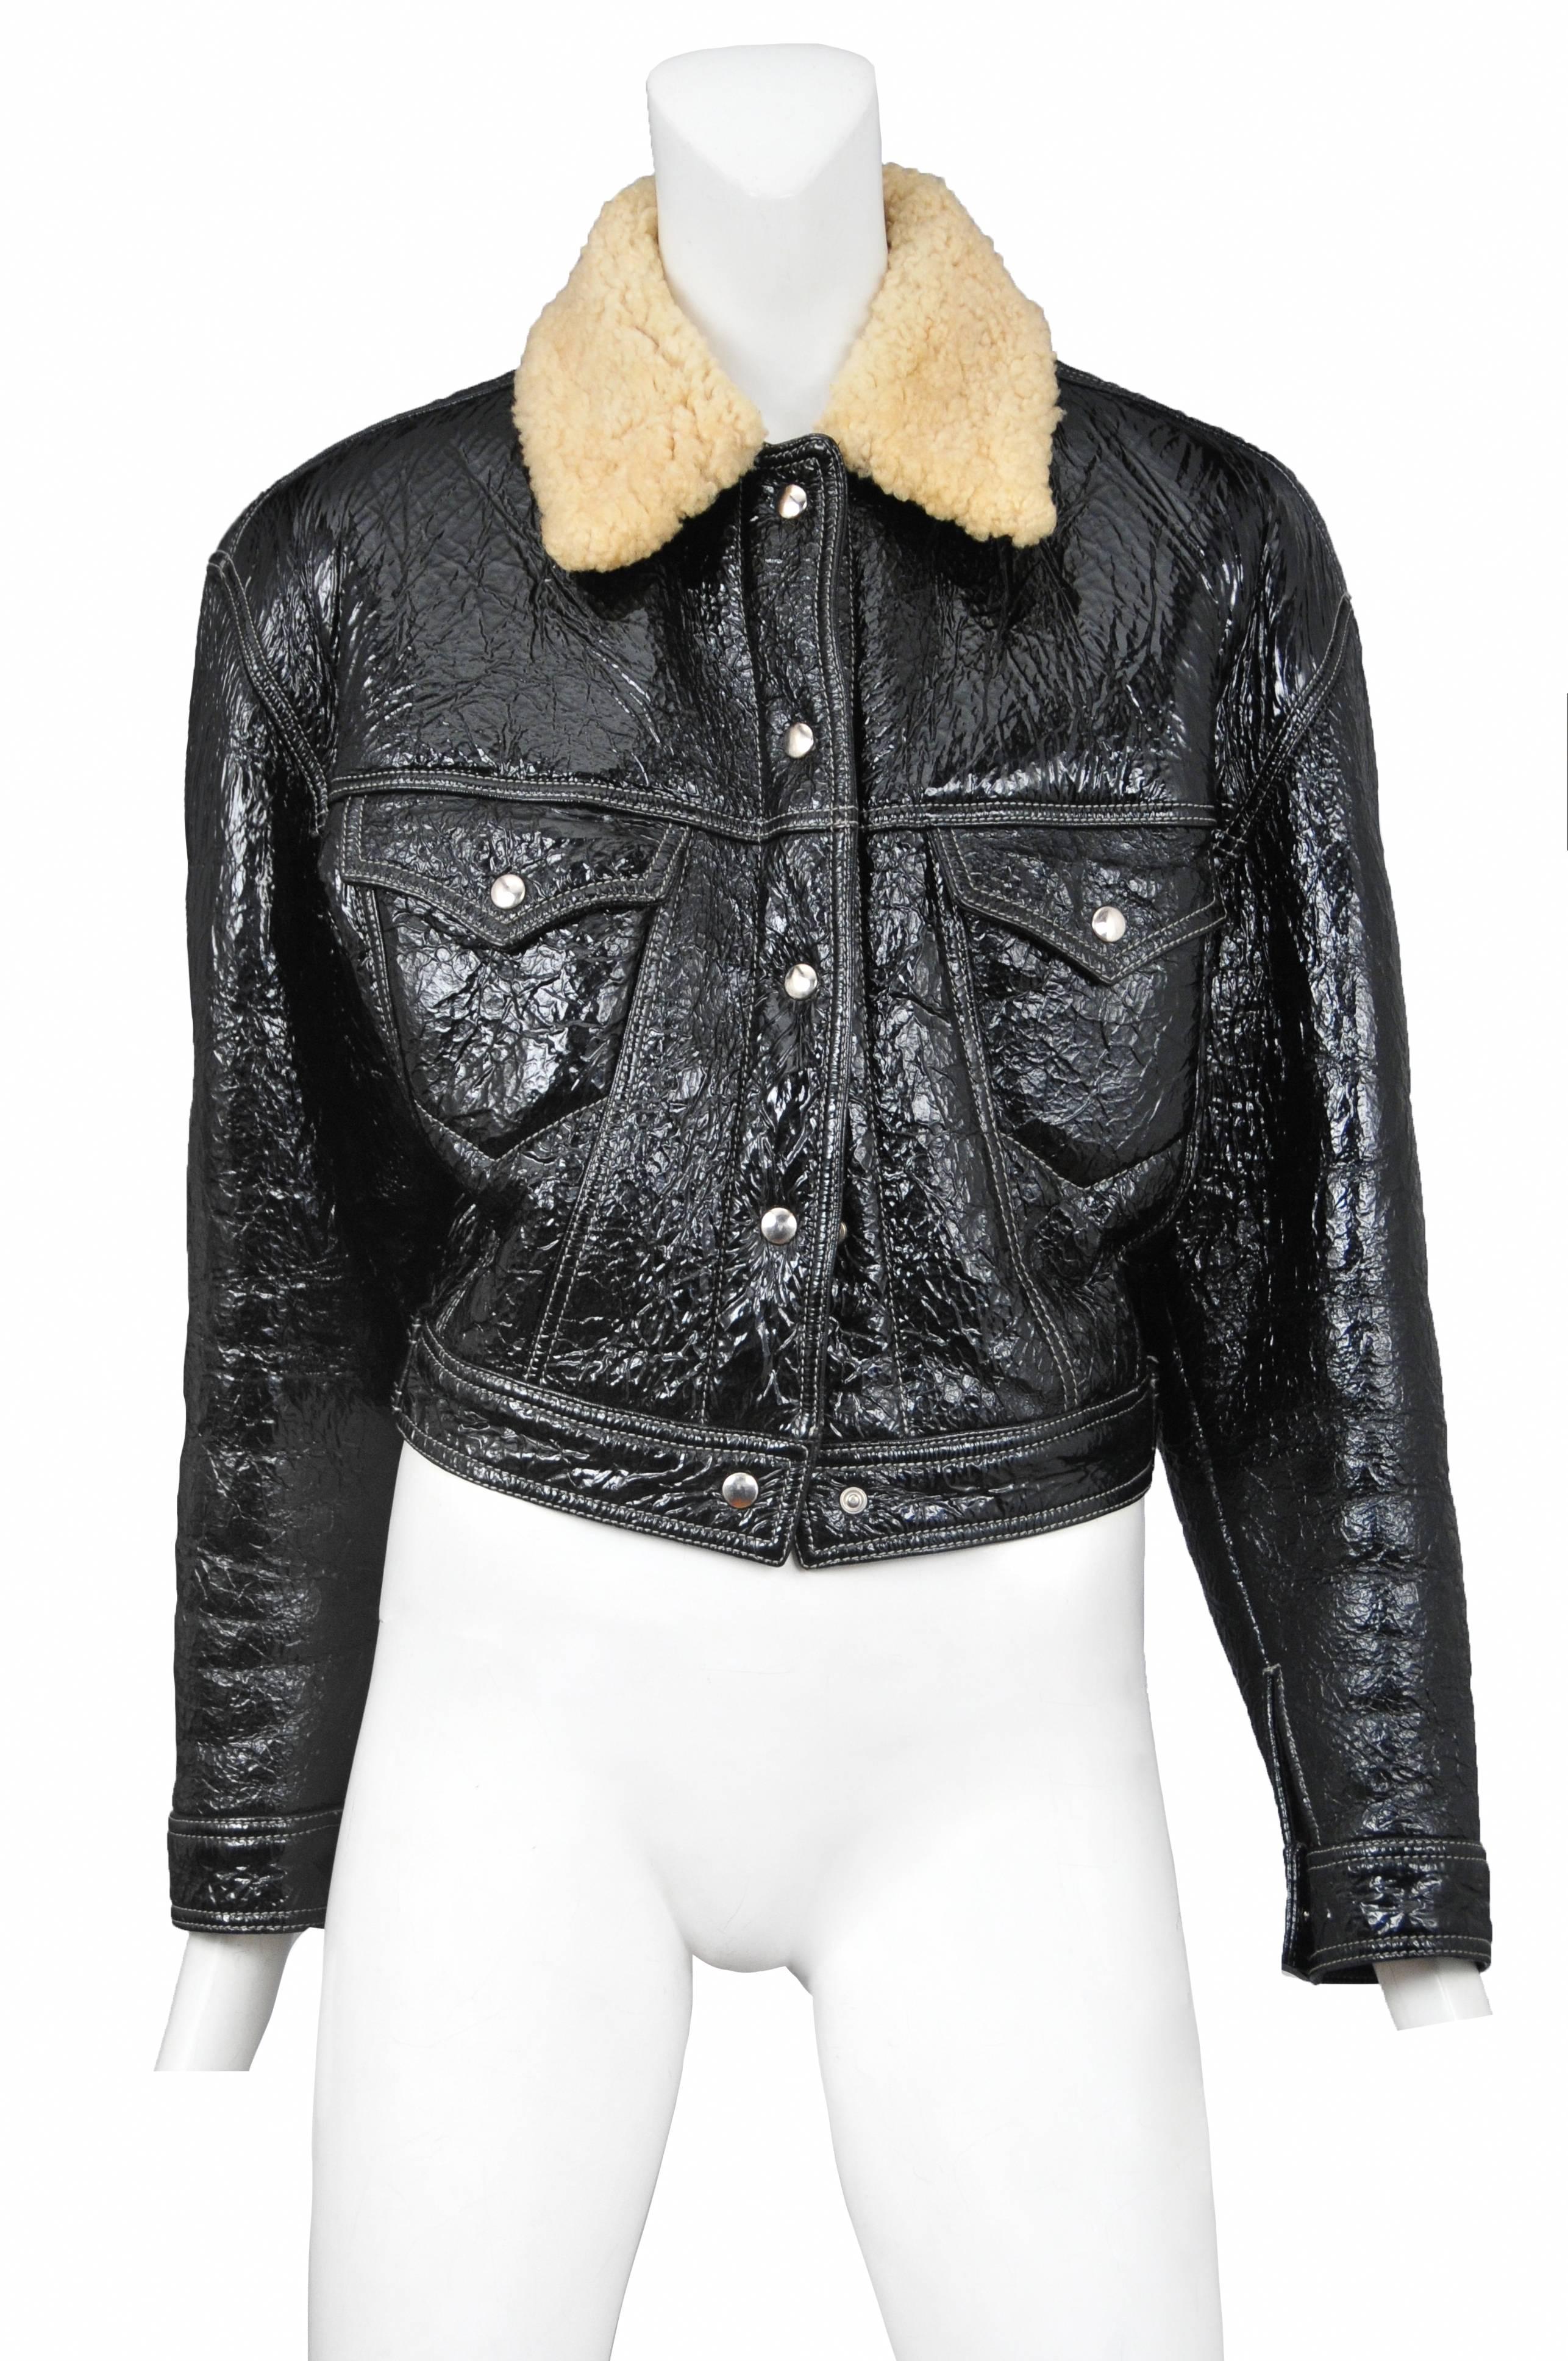 Vintage Jean Paul Gaultier black patent leather snap front jacket featuring chest pockets and faux shearling at the collar.

Please inquire for additional images.